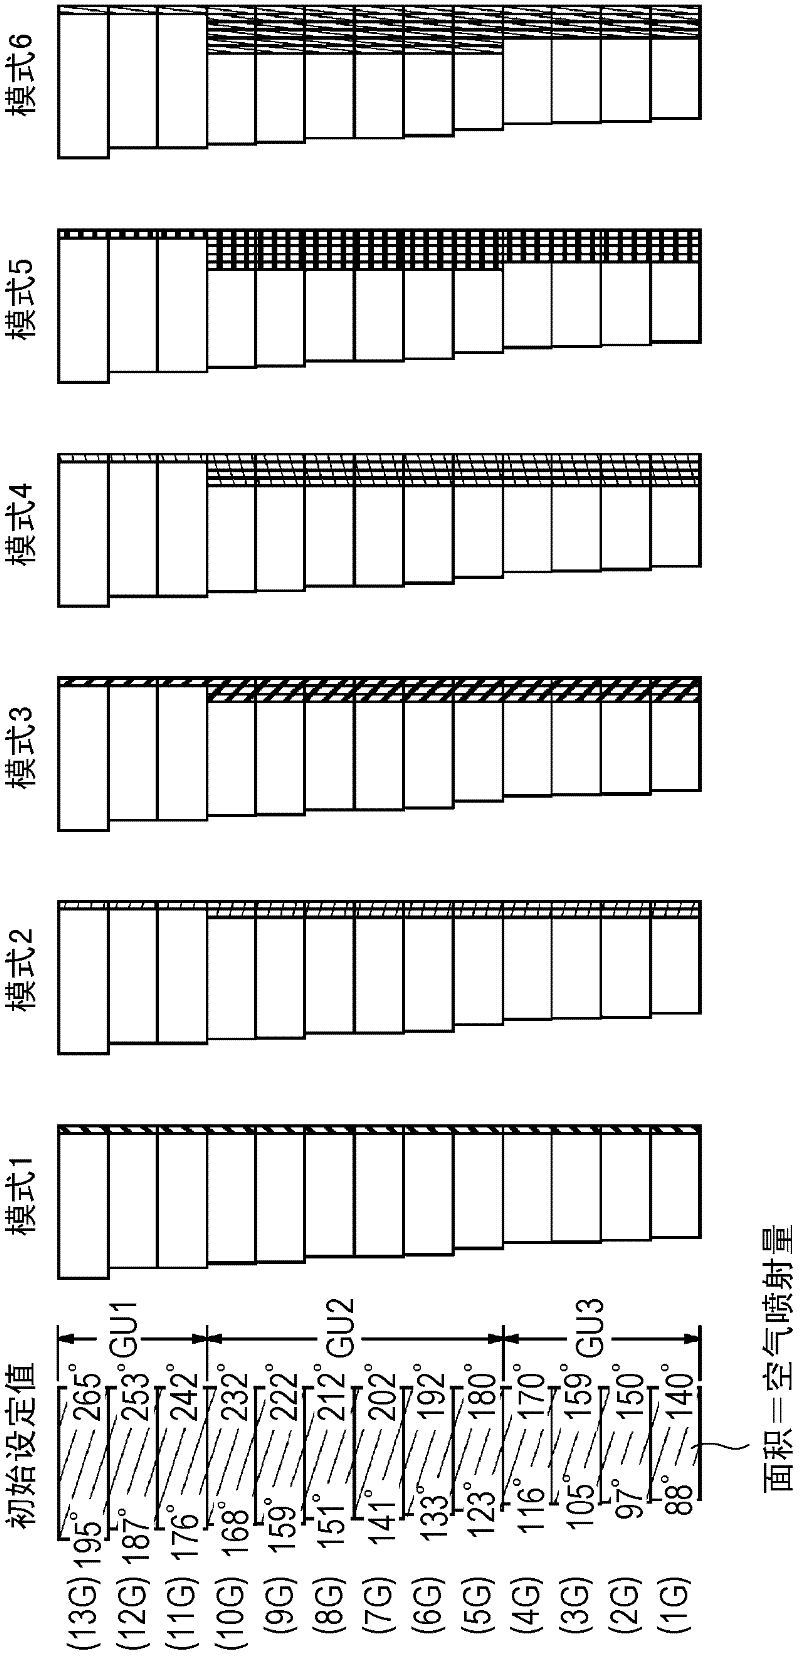 Ejection-period setting method for sub-nozzles in air jet loom